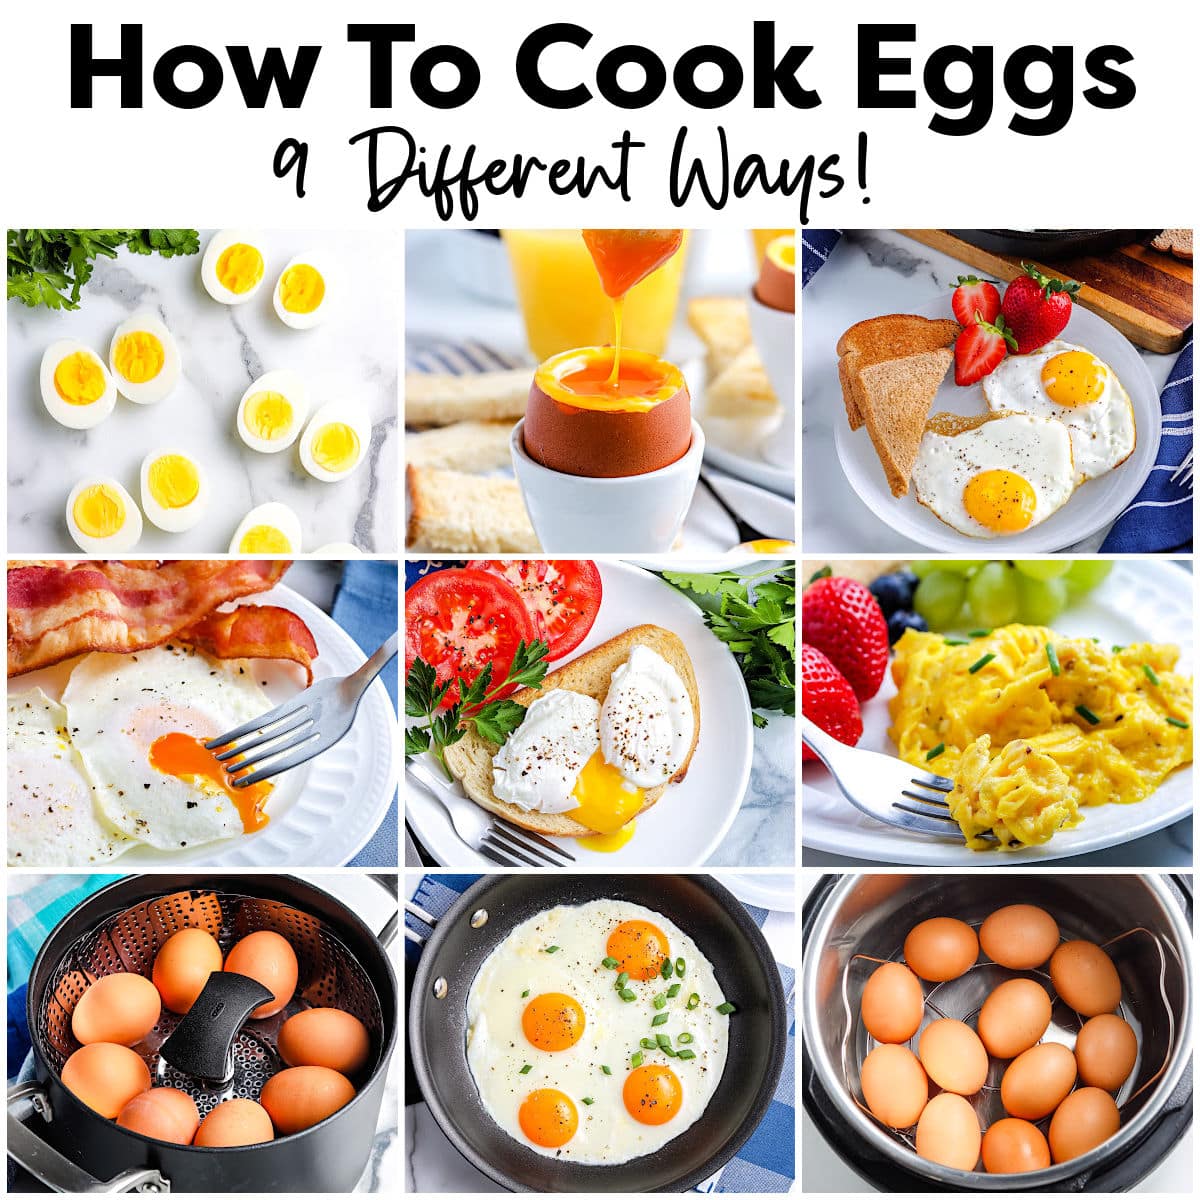 A picture collage showing the different ways of How To Make Eggs.